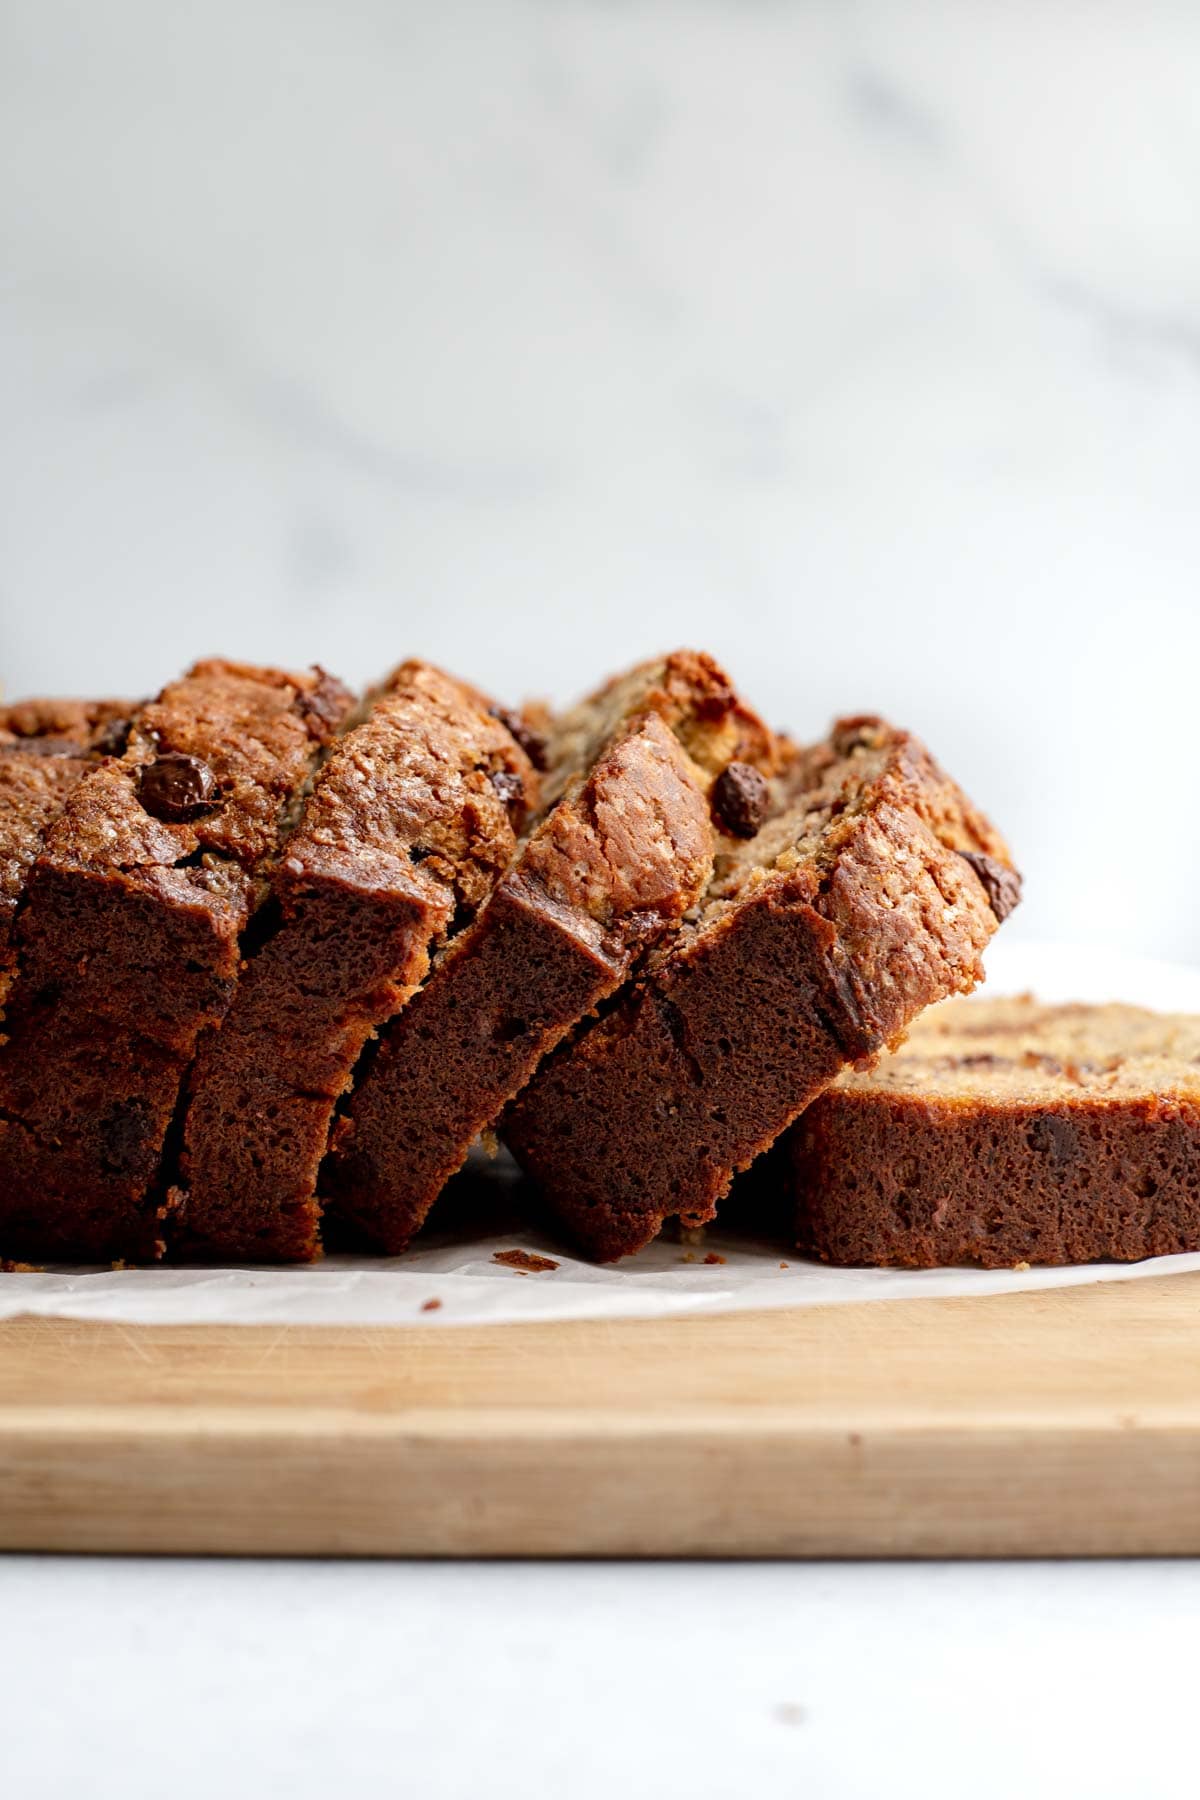 Slices of banana bread leaning over on a cutting board lined with parchment paper